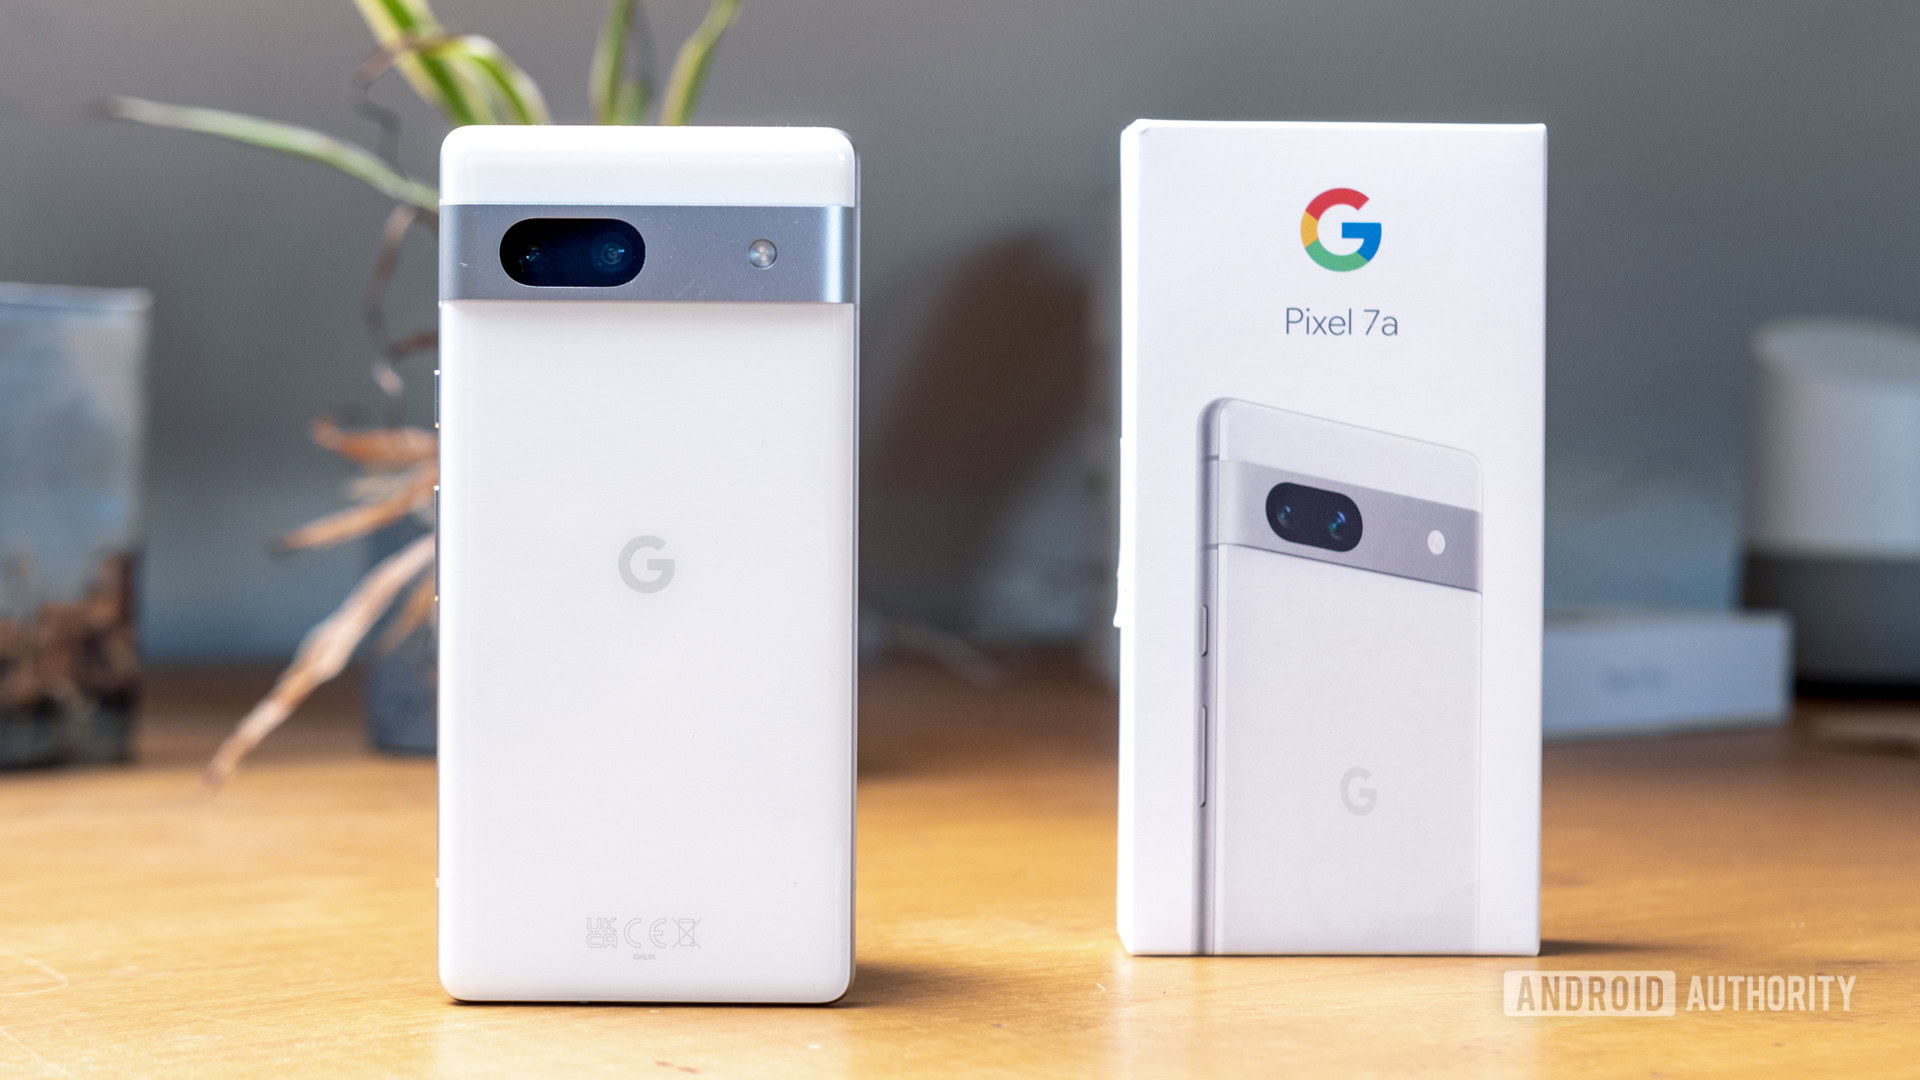 The Pixel 7a potentially incorporates a marginally lower-performing Tensor G2 processor